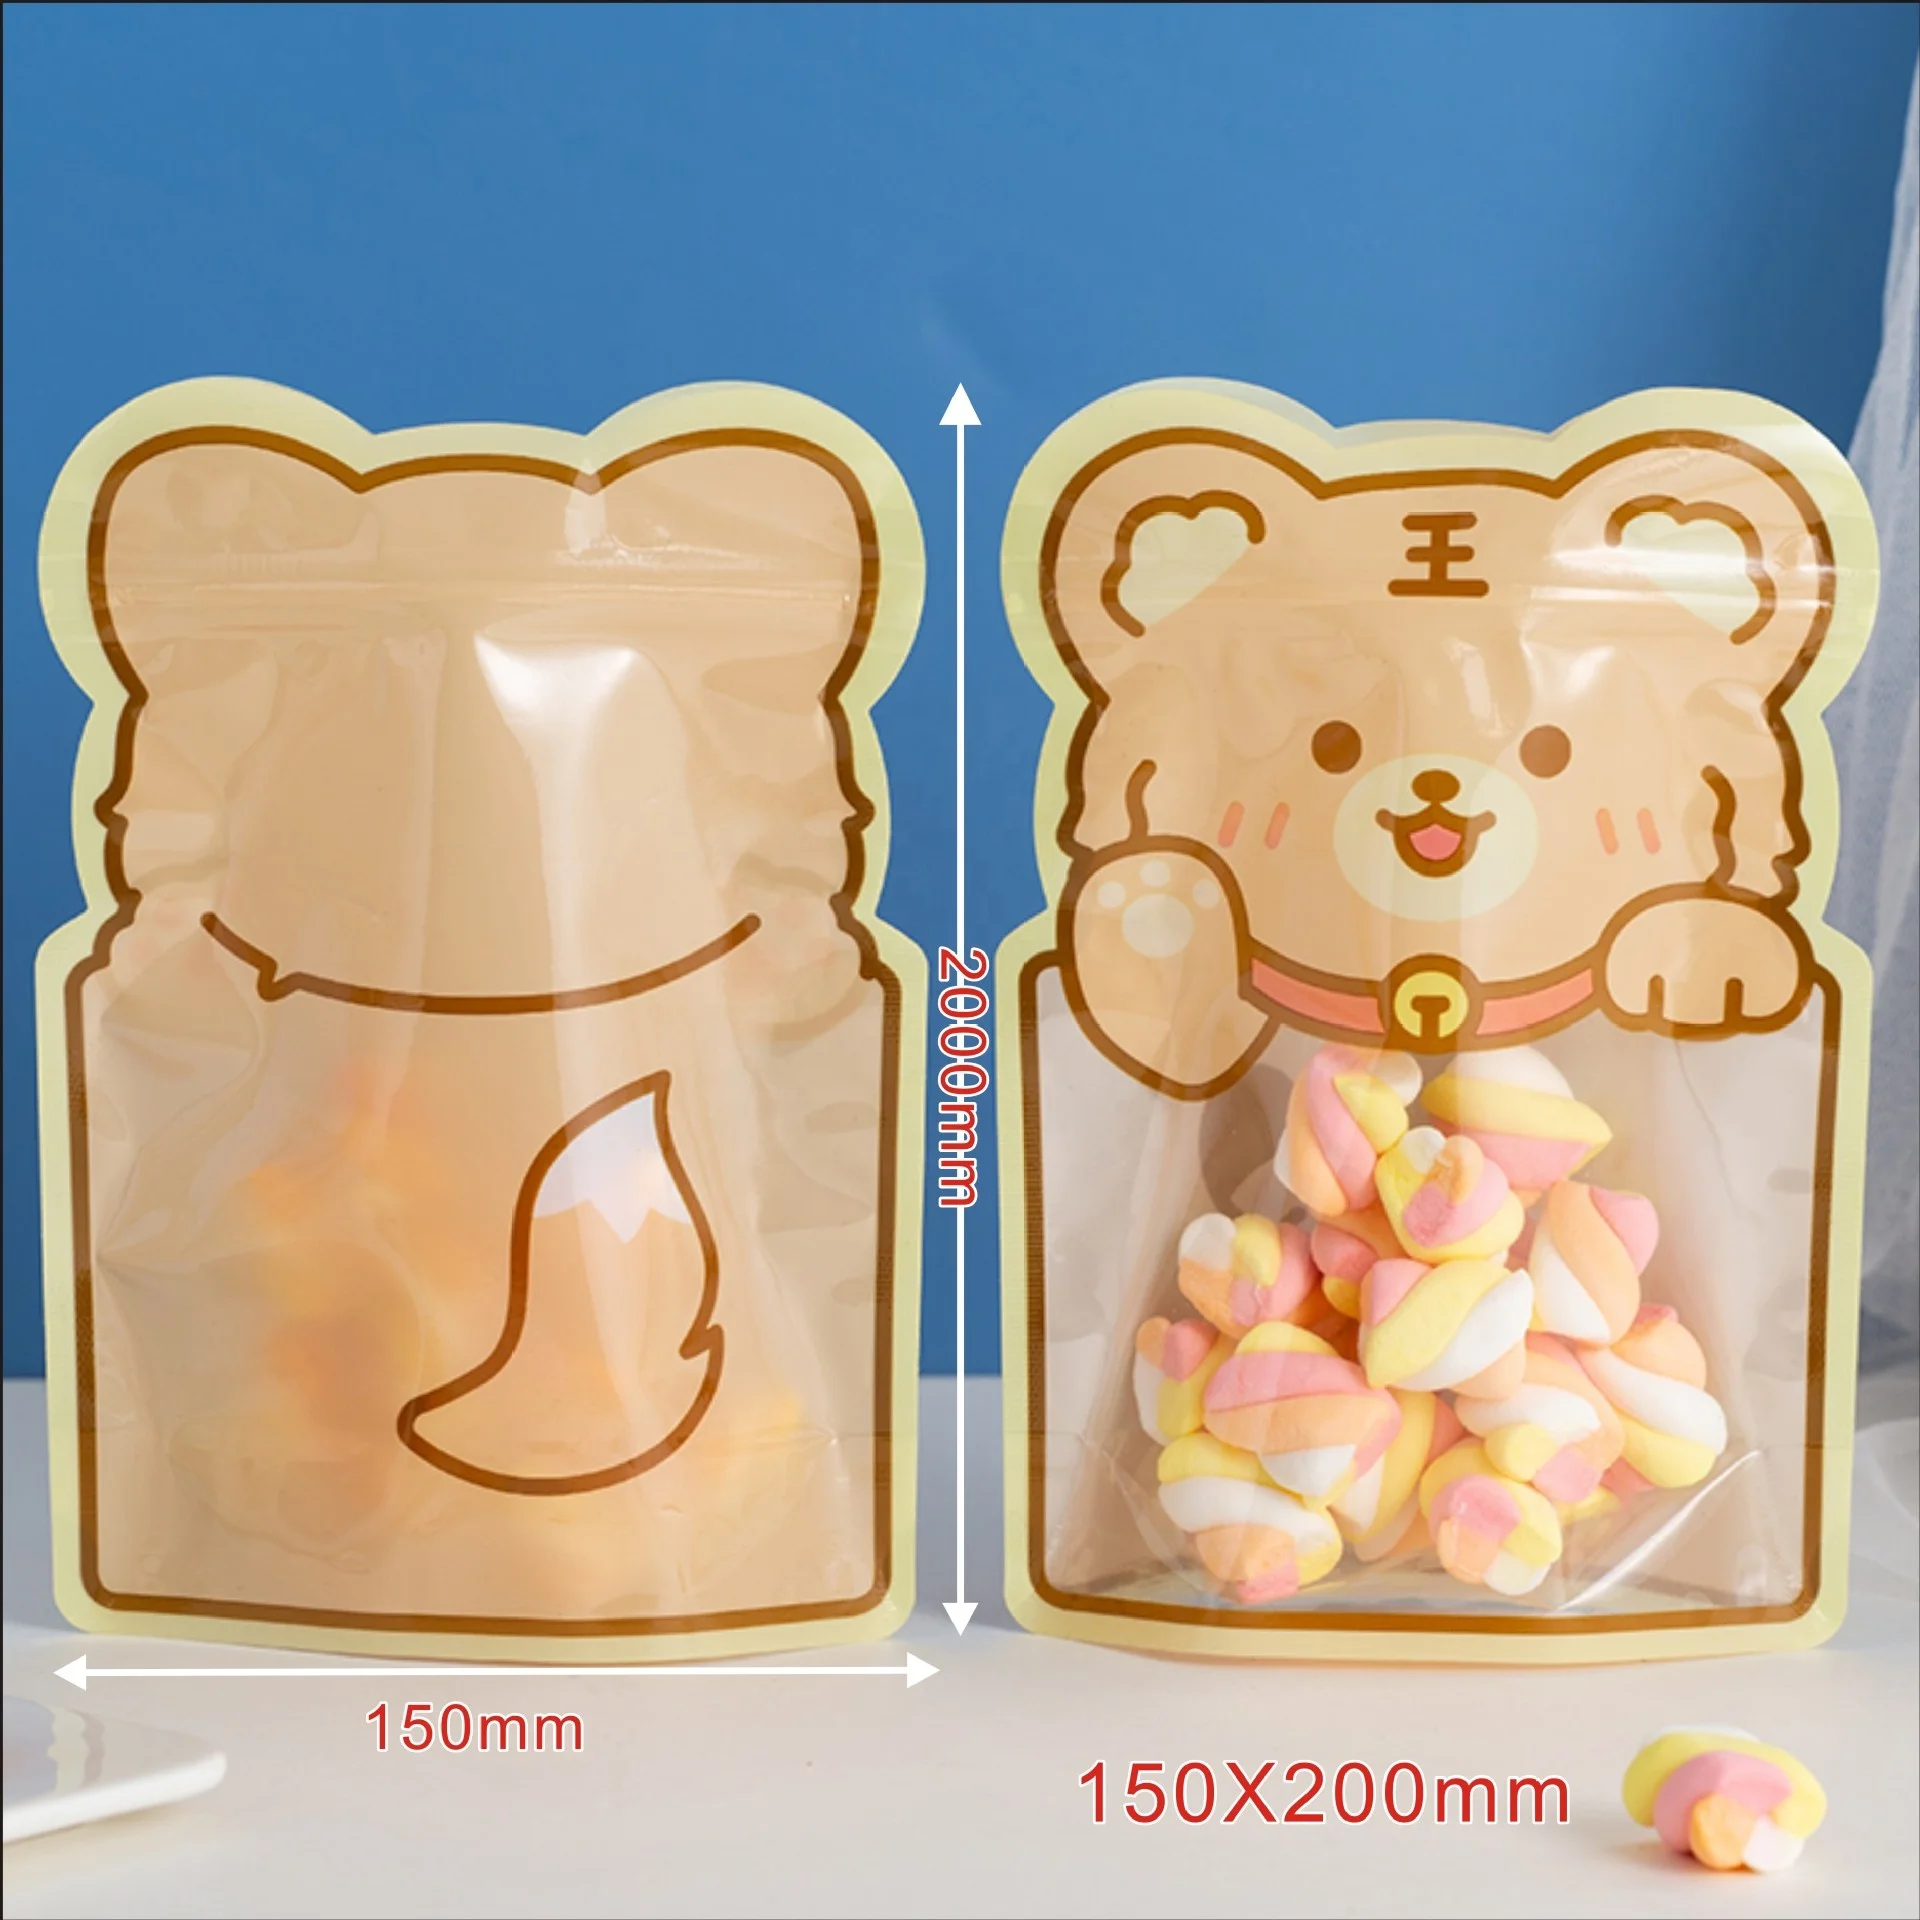 Custom 3.5g 7g 14g 28g flower hologram smell proof ziplock unique special shape die cut mylar bags for cookie candy gummy details